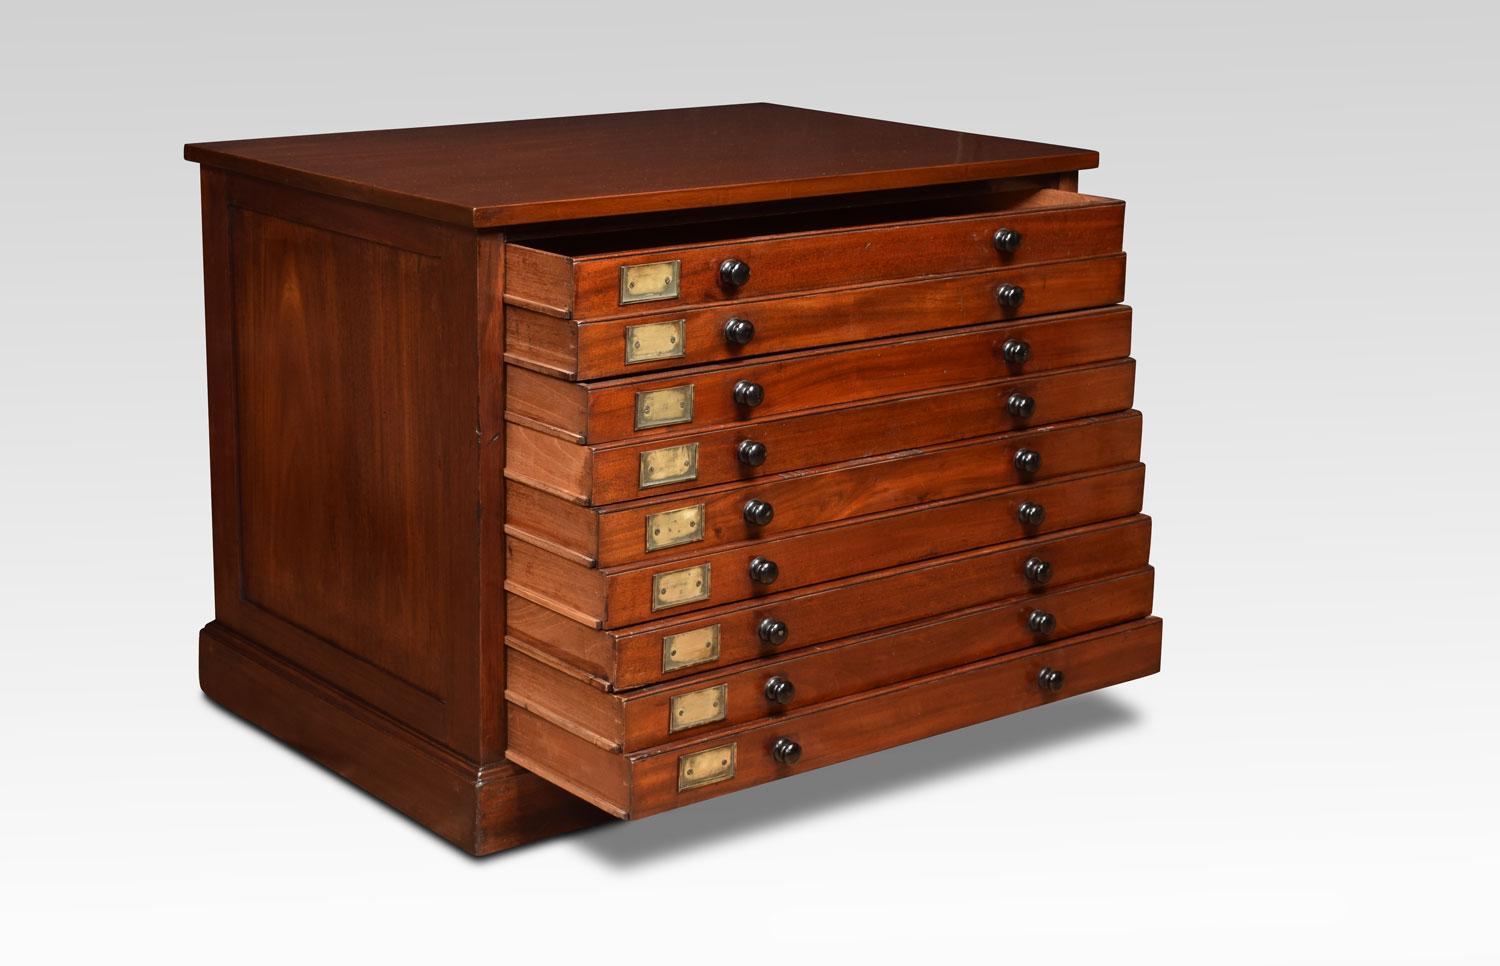 Exceptional pair of 19th century specimen chests, having large rectangular mahogany top above nine drawers all fitted with knob handles and card holders made of brass. The chests having polished sides and back. All raised up on plinth